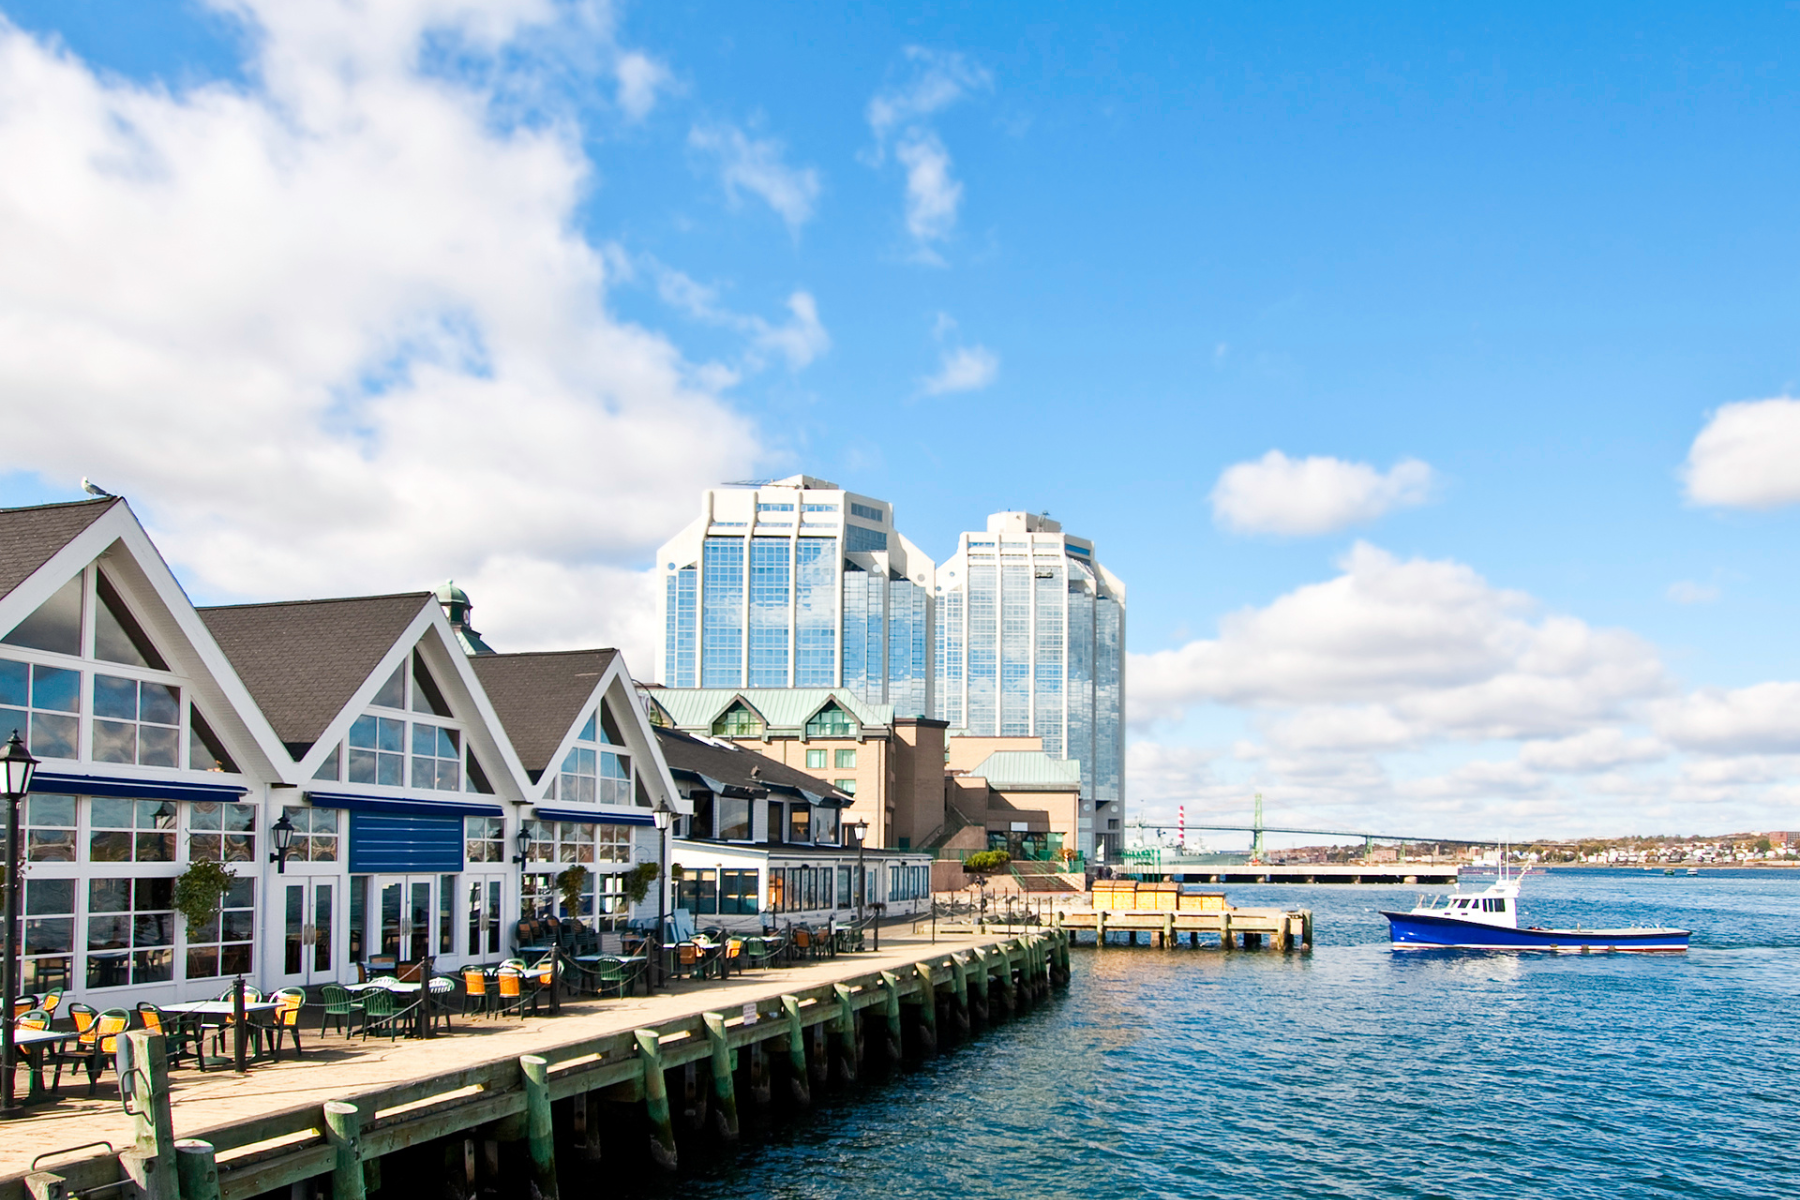 10 Best Things to Do in Halifax, Nova Scotia